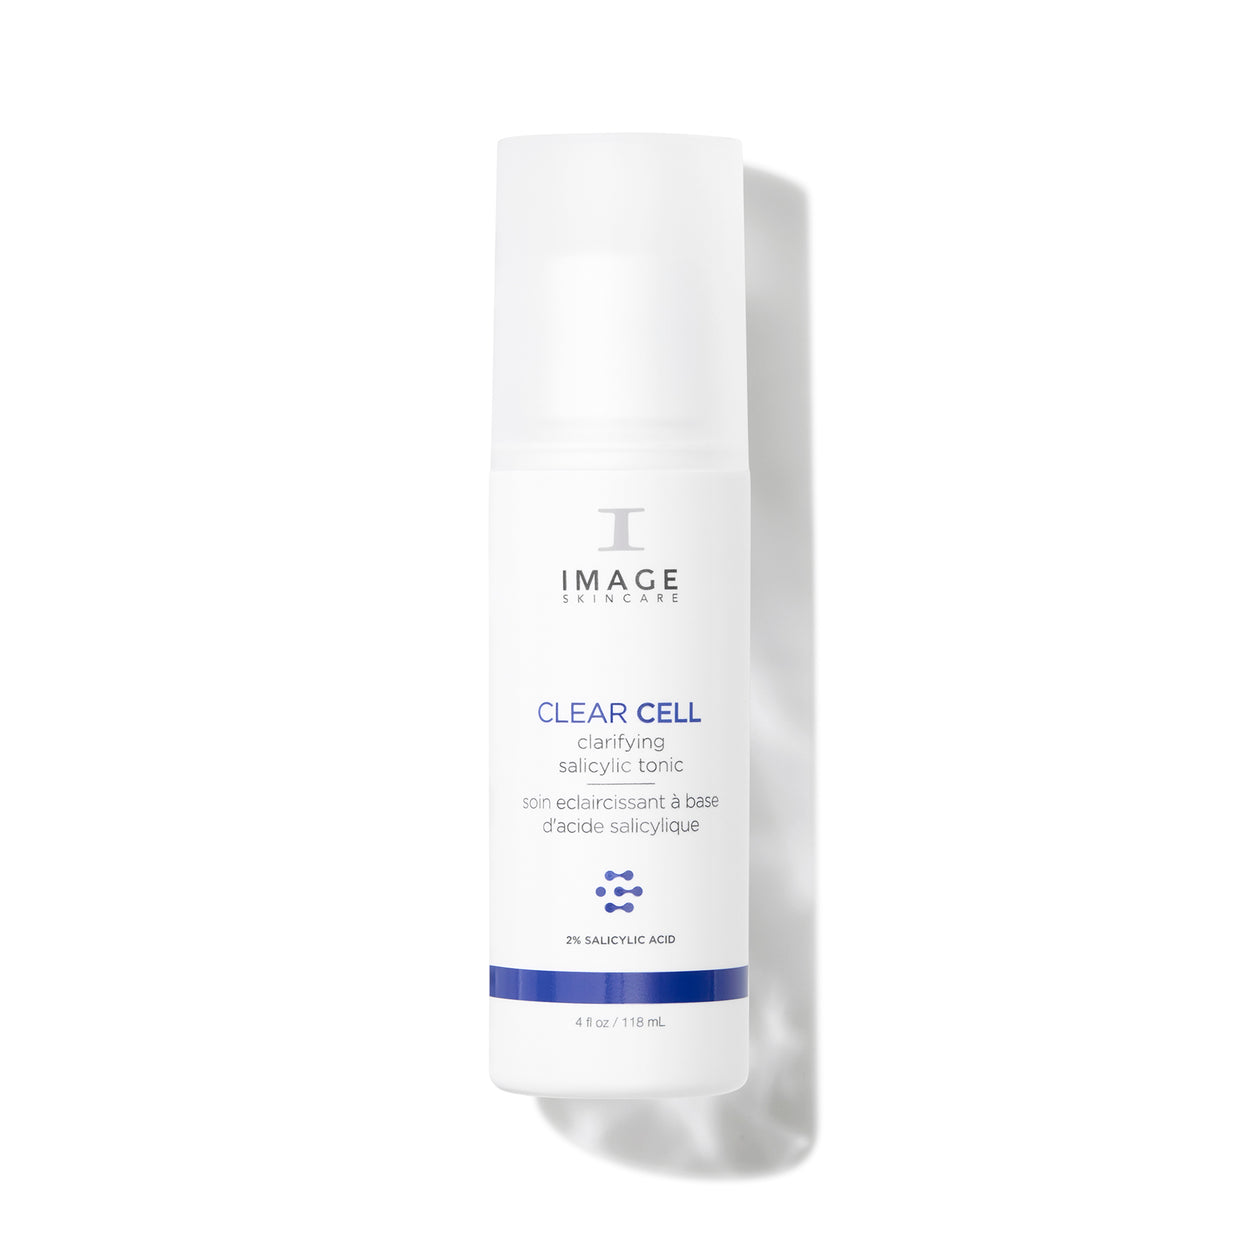 Image Skincare Clear Cell Clarifying Salicylic Tonic Shop At Exclusive Beauty